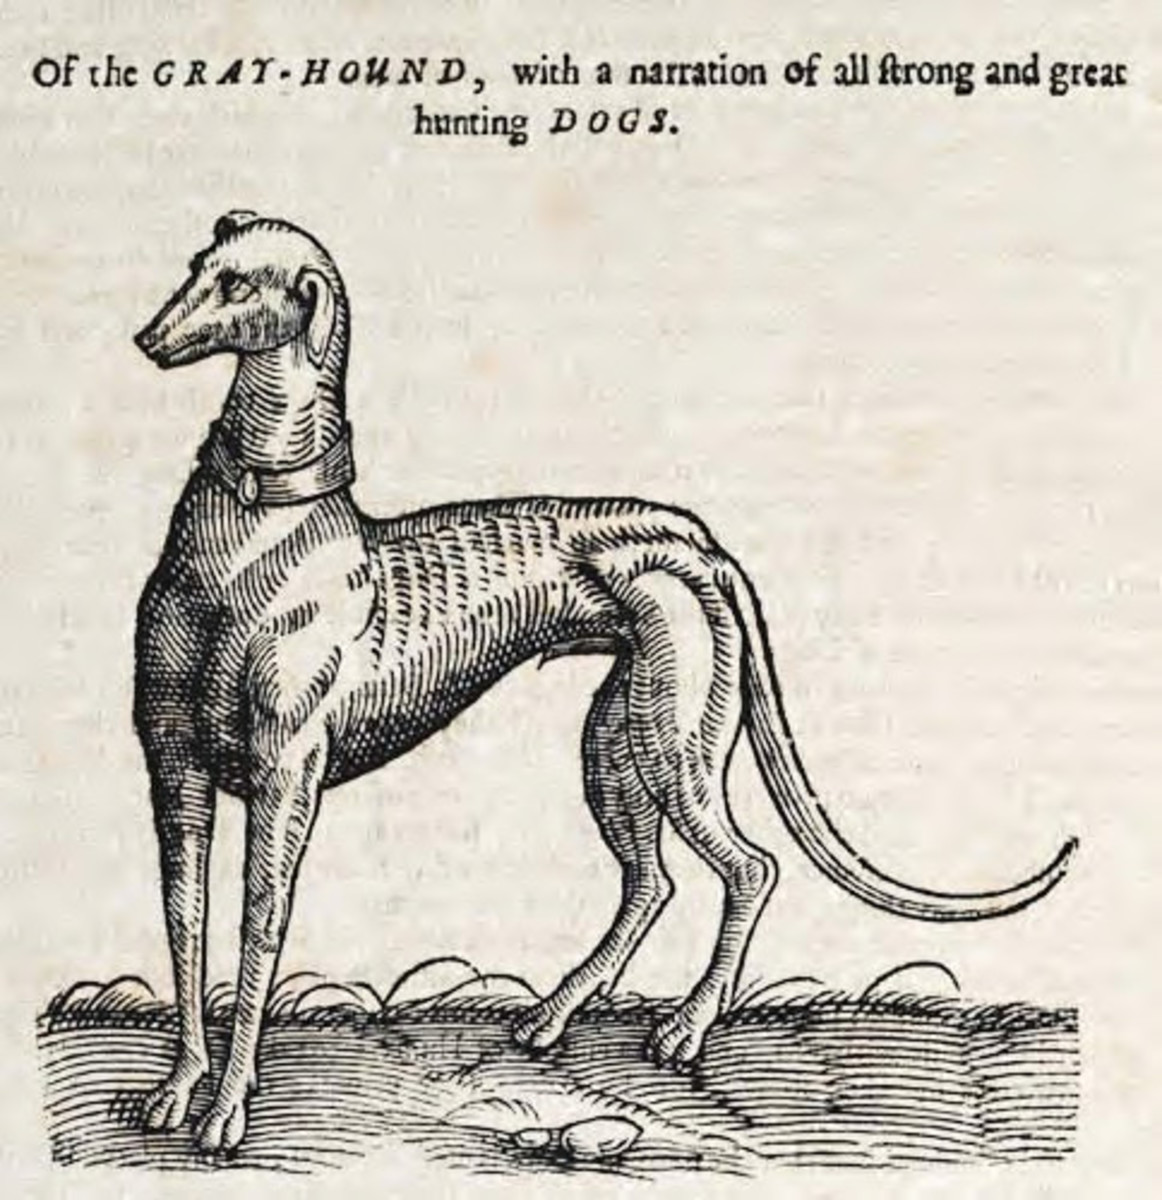 "Gray-Hound" in a 1658 English woodcut